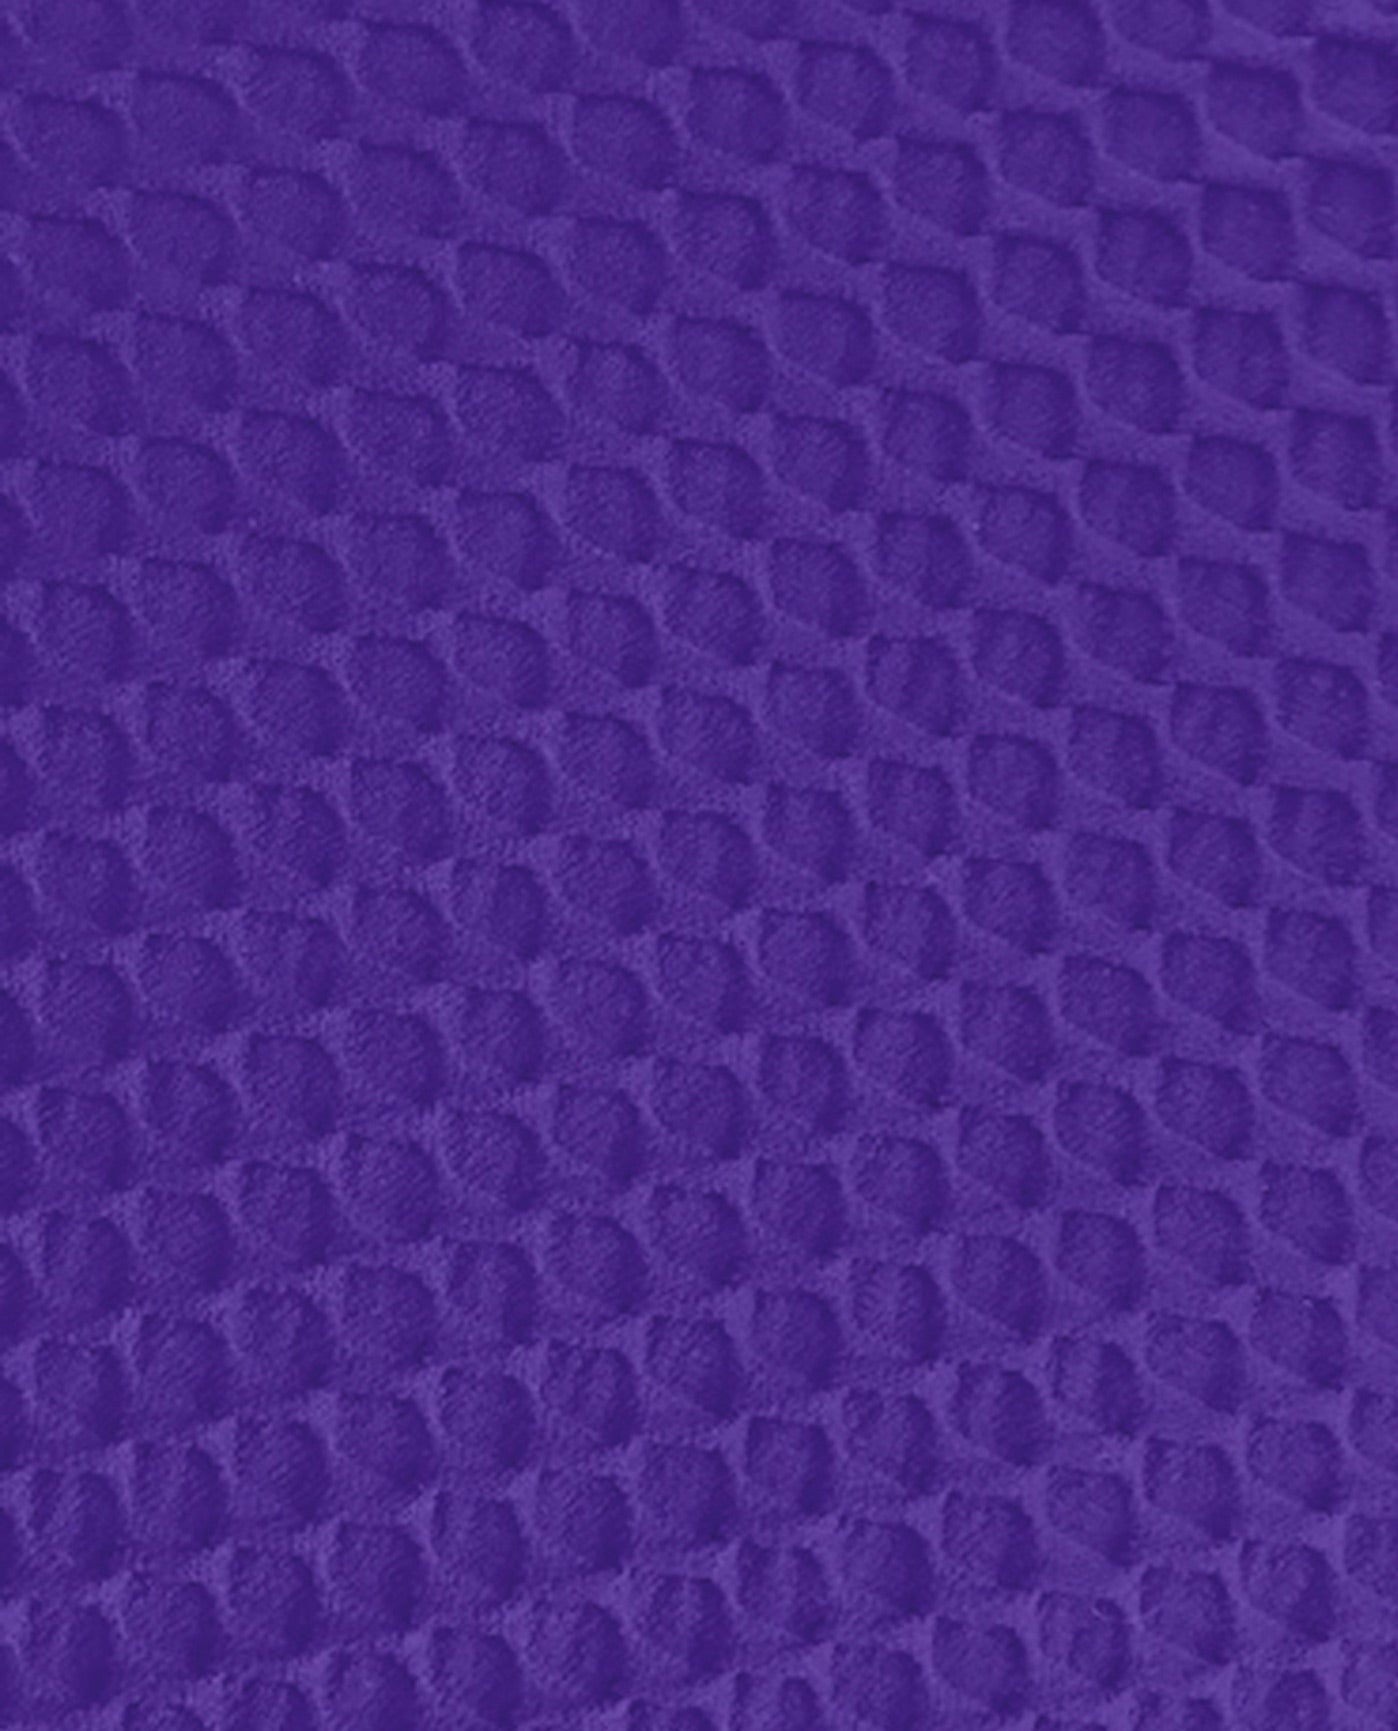 FABRIC DETAIL OF CHLORINE RESISTANT AQUAMORE SOLID TEXTURED SURPLICE BACK PLUS SIZE SWIMSUIT | 510 AQT TEXTURED PURPLE